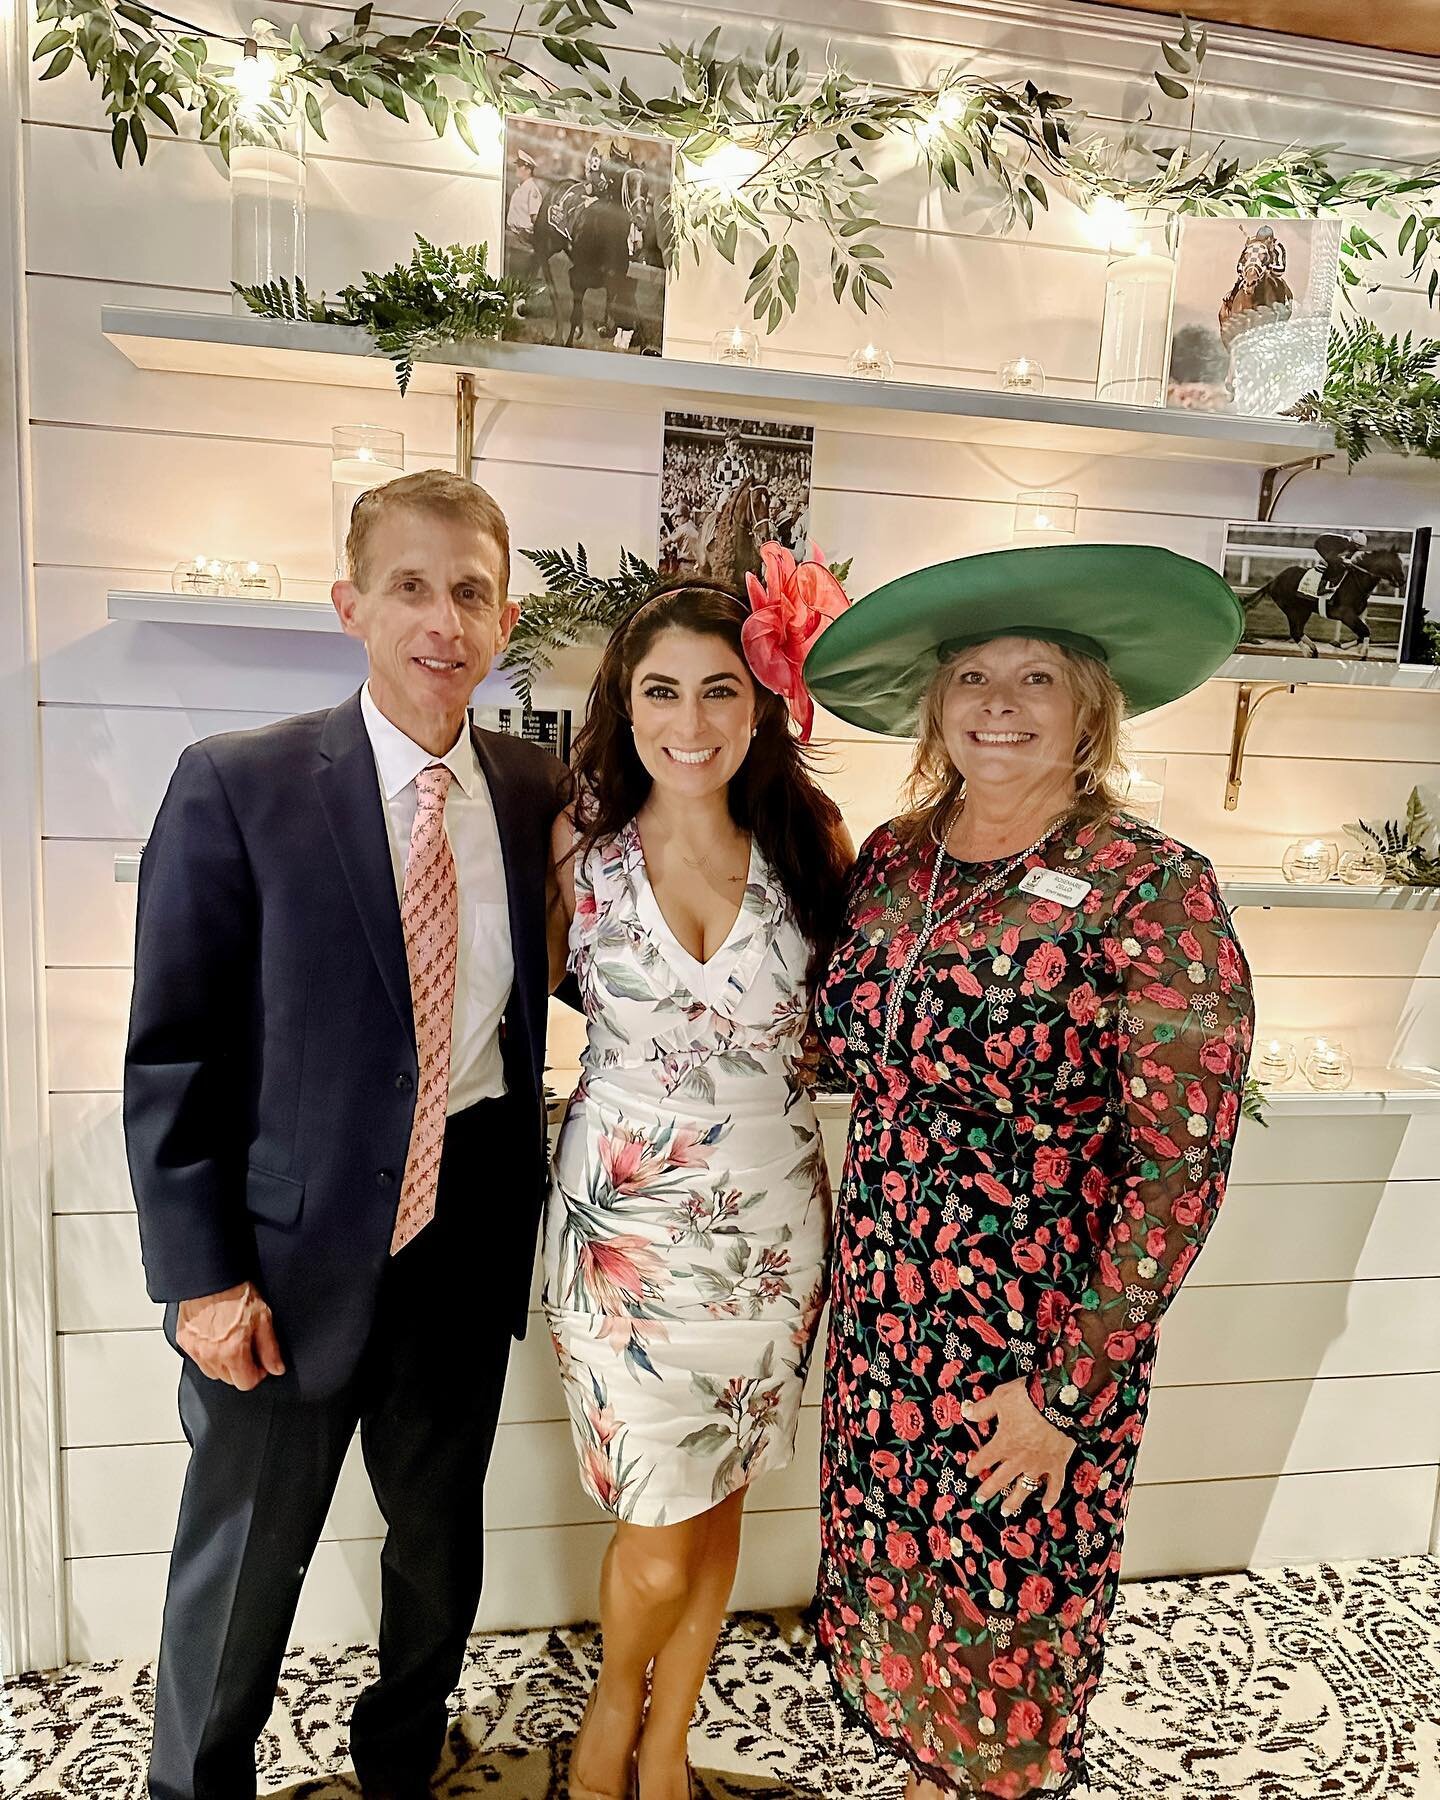 I had such a great night at the 32nd Ronald McDonald Gala at @greathorsema !

TommyCar Auto is proud to support this event as it raises funds and awareness for families with sick children, providing them with the resources and support they need durin